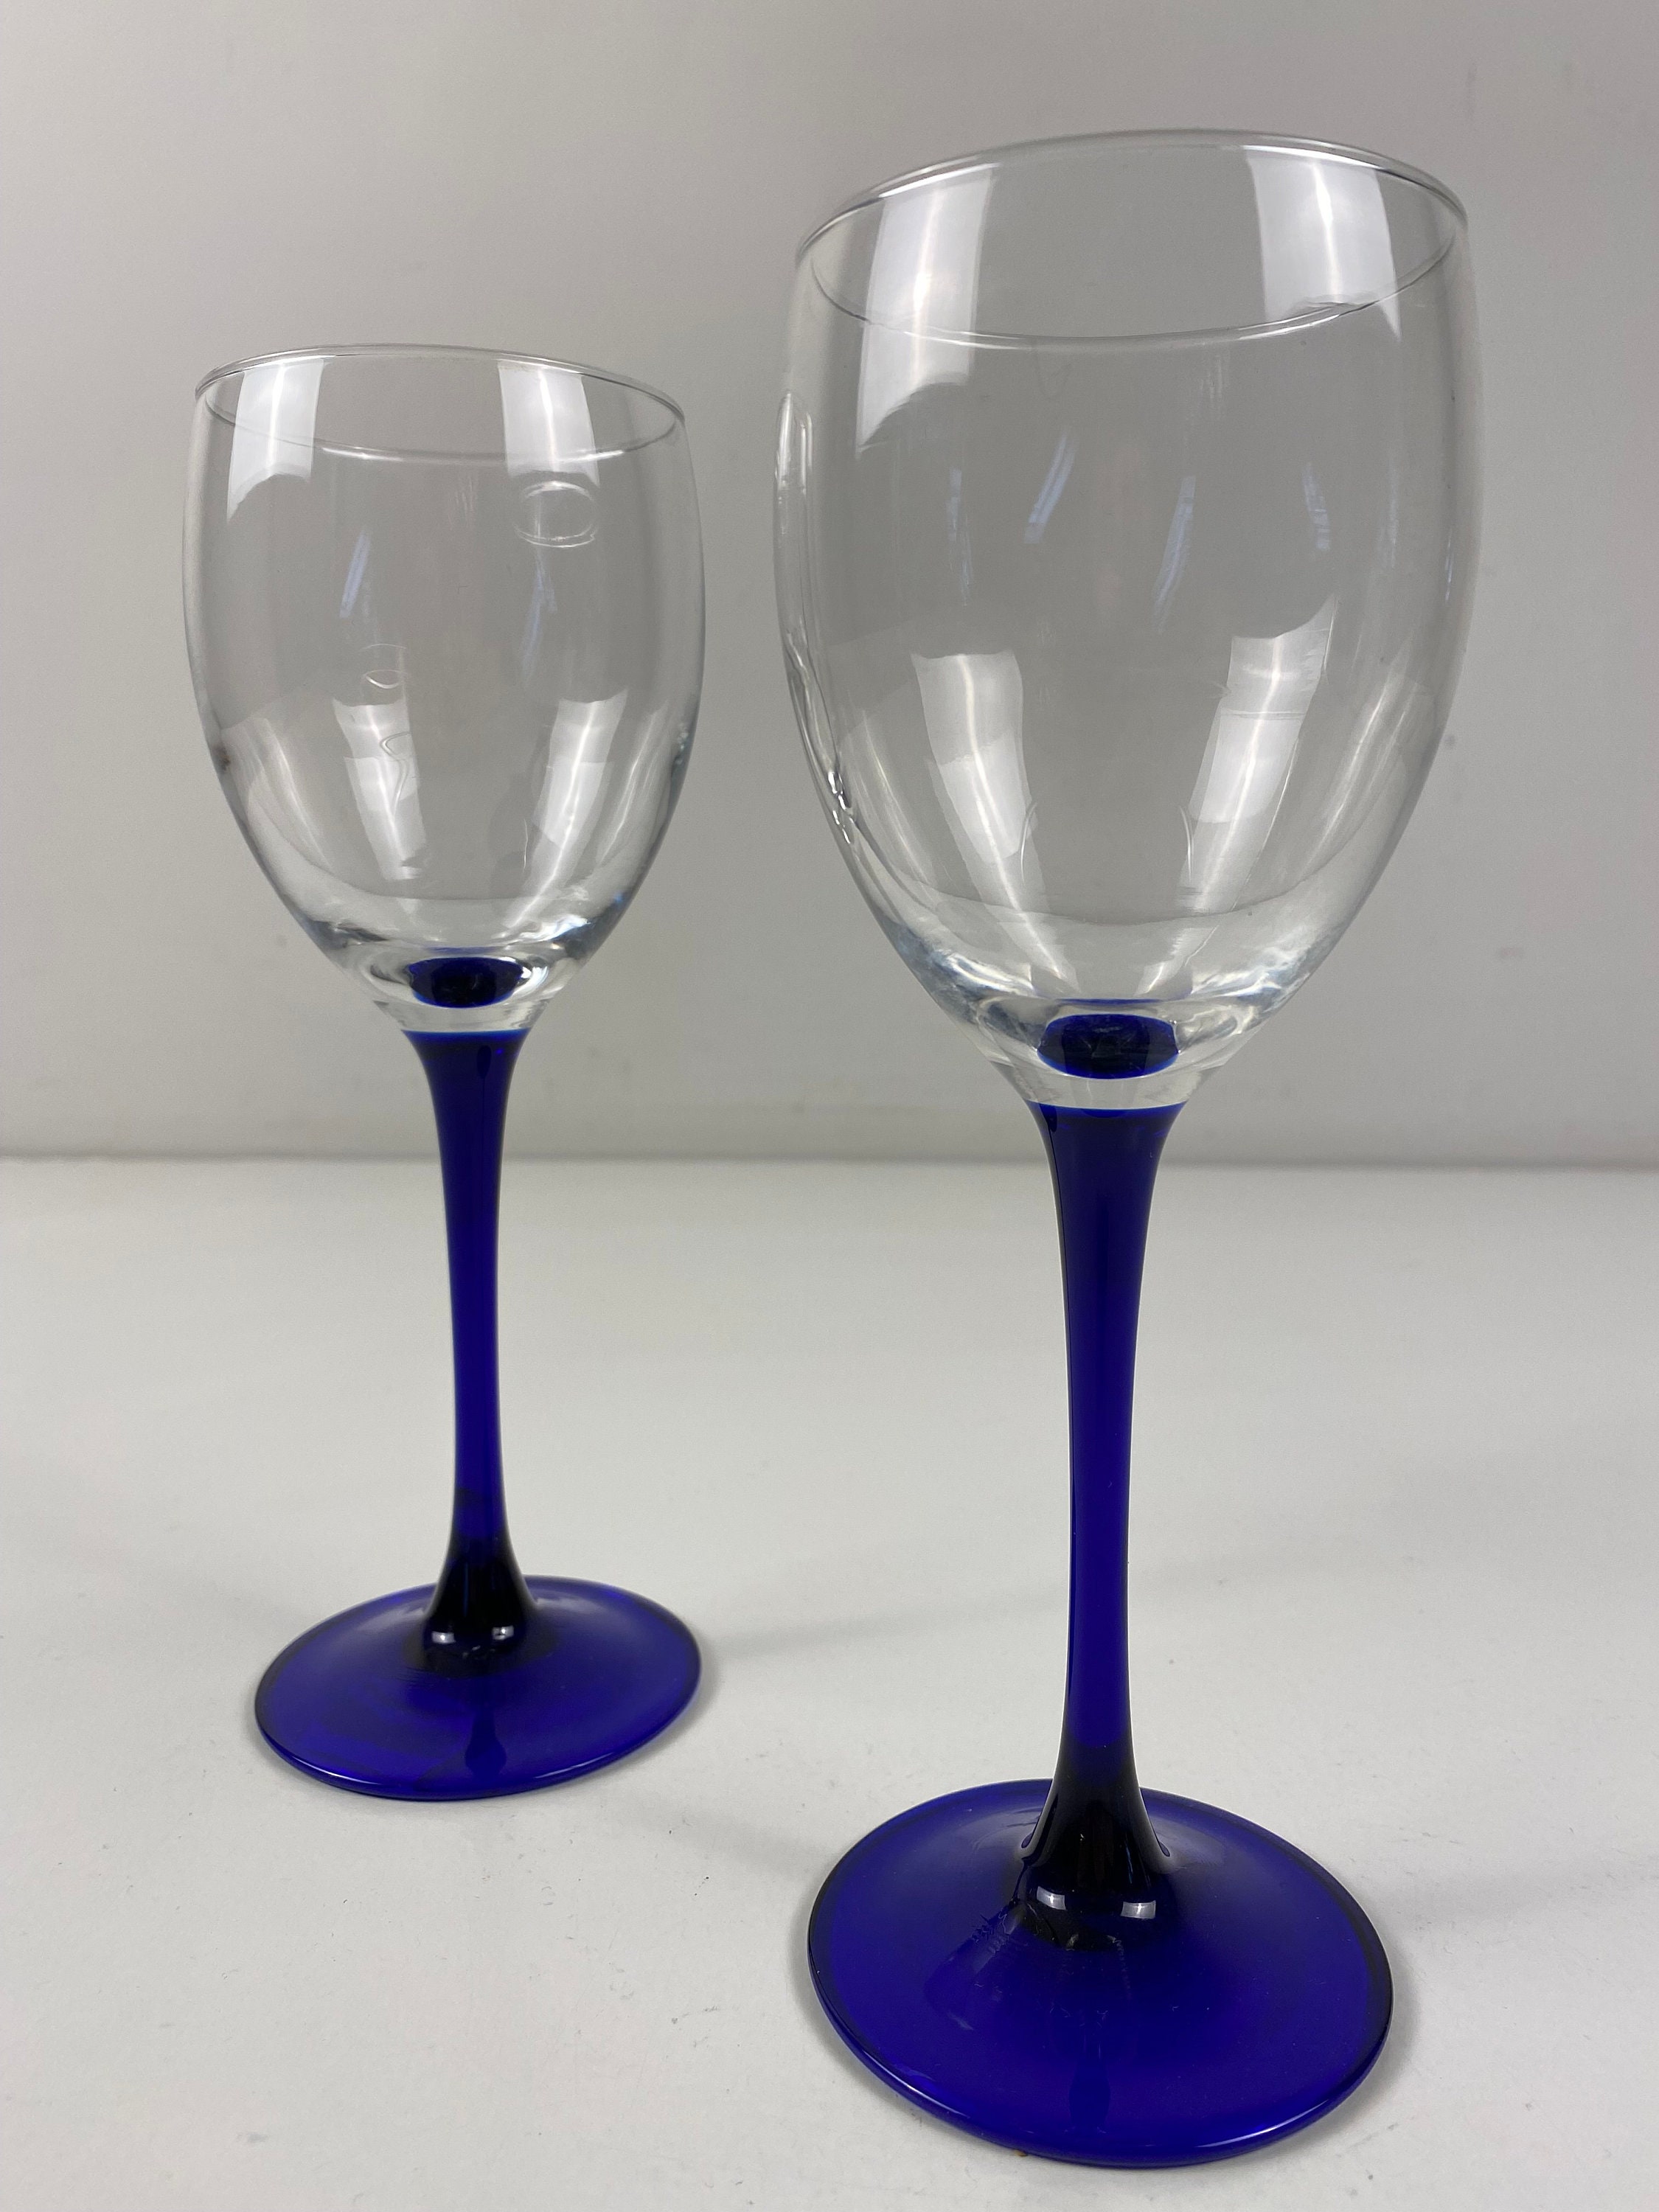 2 Large Vintage French Blue Blown Glass Stem Wine Glasses, Tall Retro Hand  Crafted Glassware Goblets from France, Big Drinking Glasses